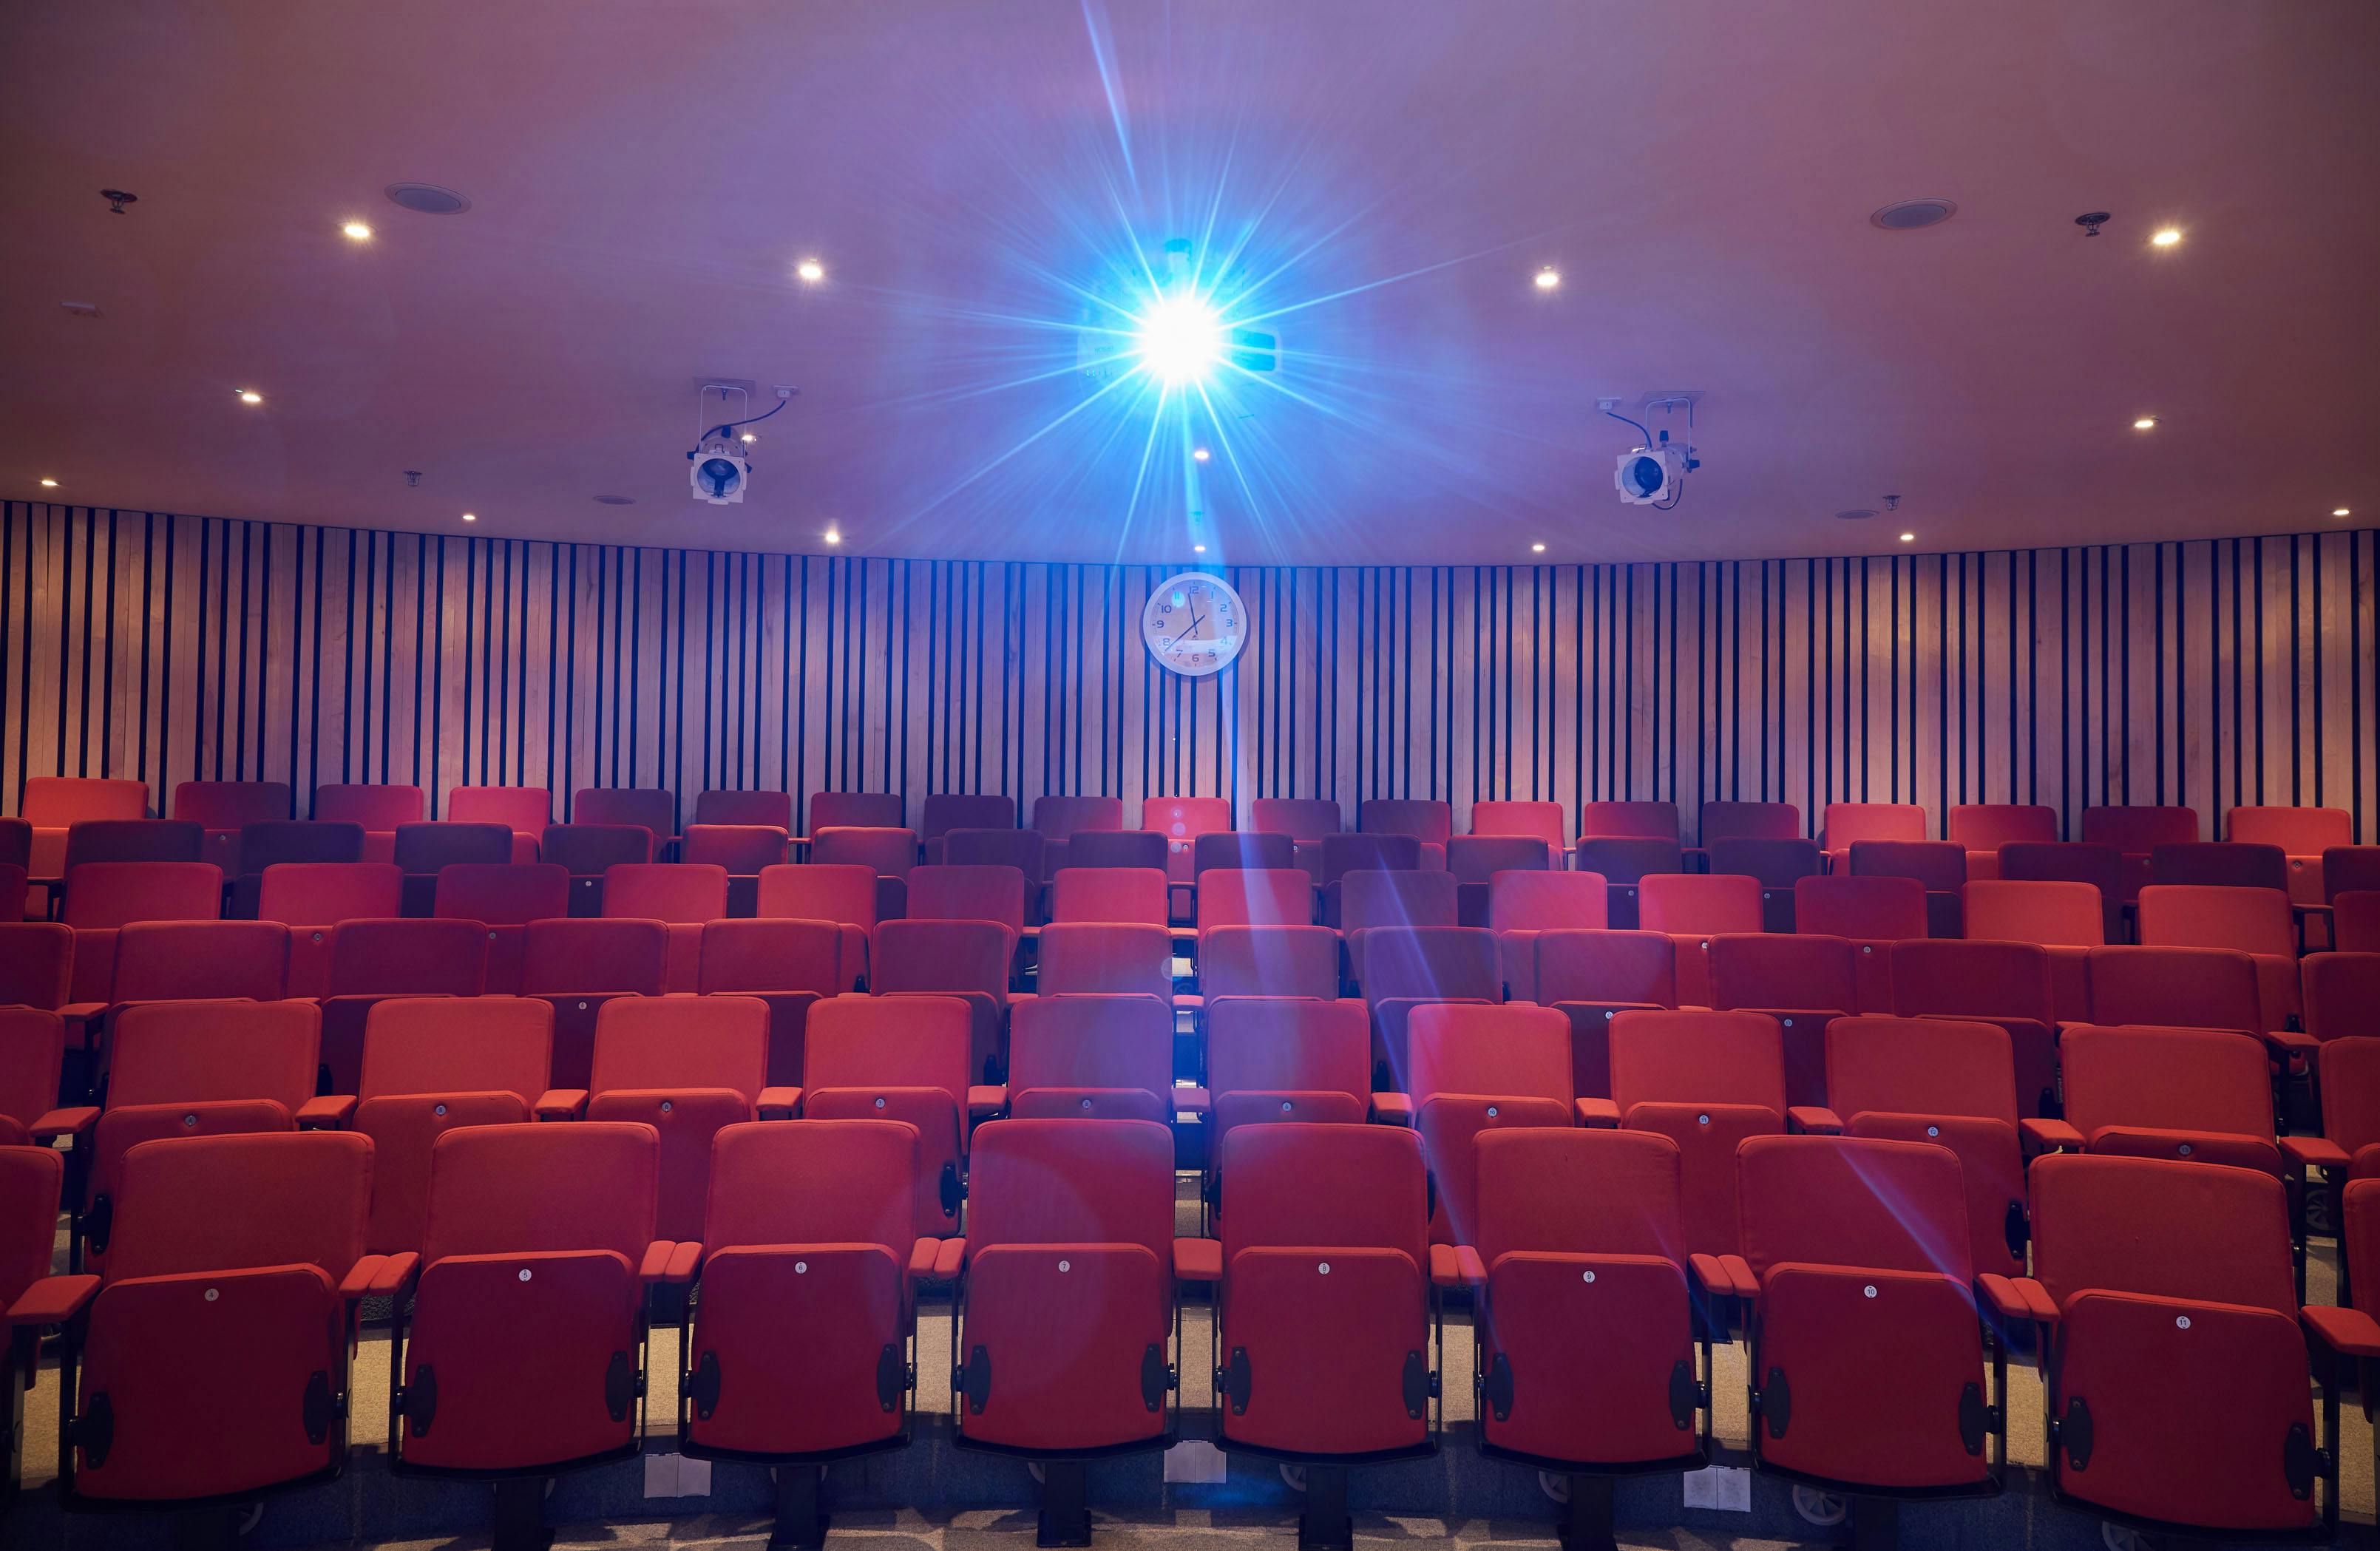 Theatre style tiered  seating with s bright projection light above.